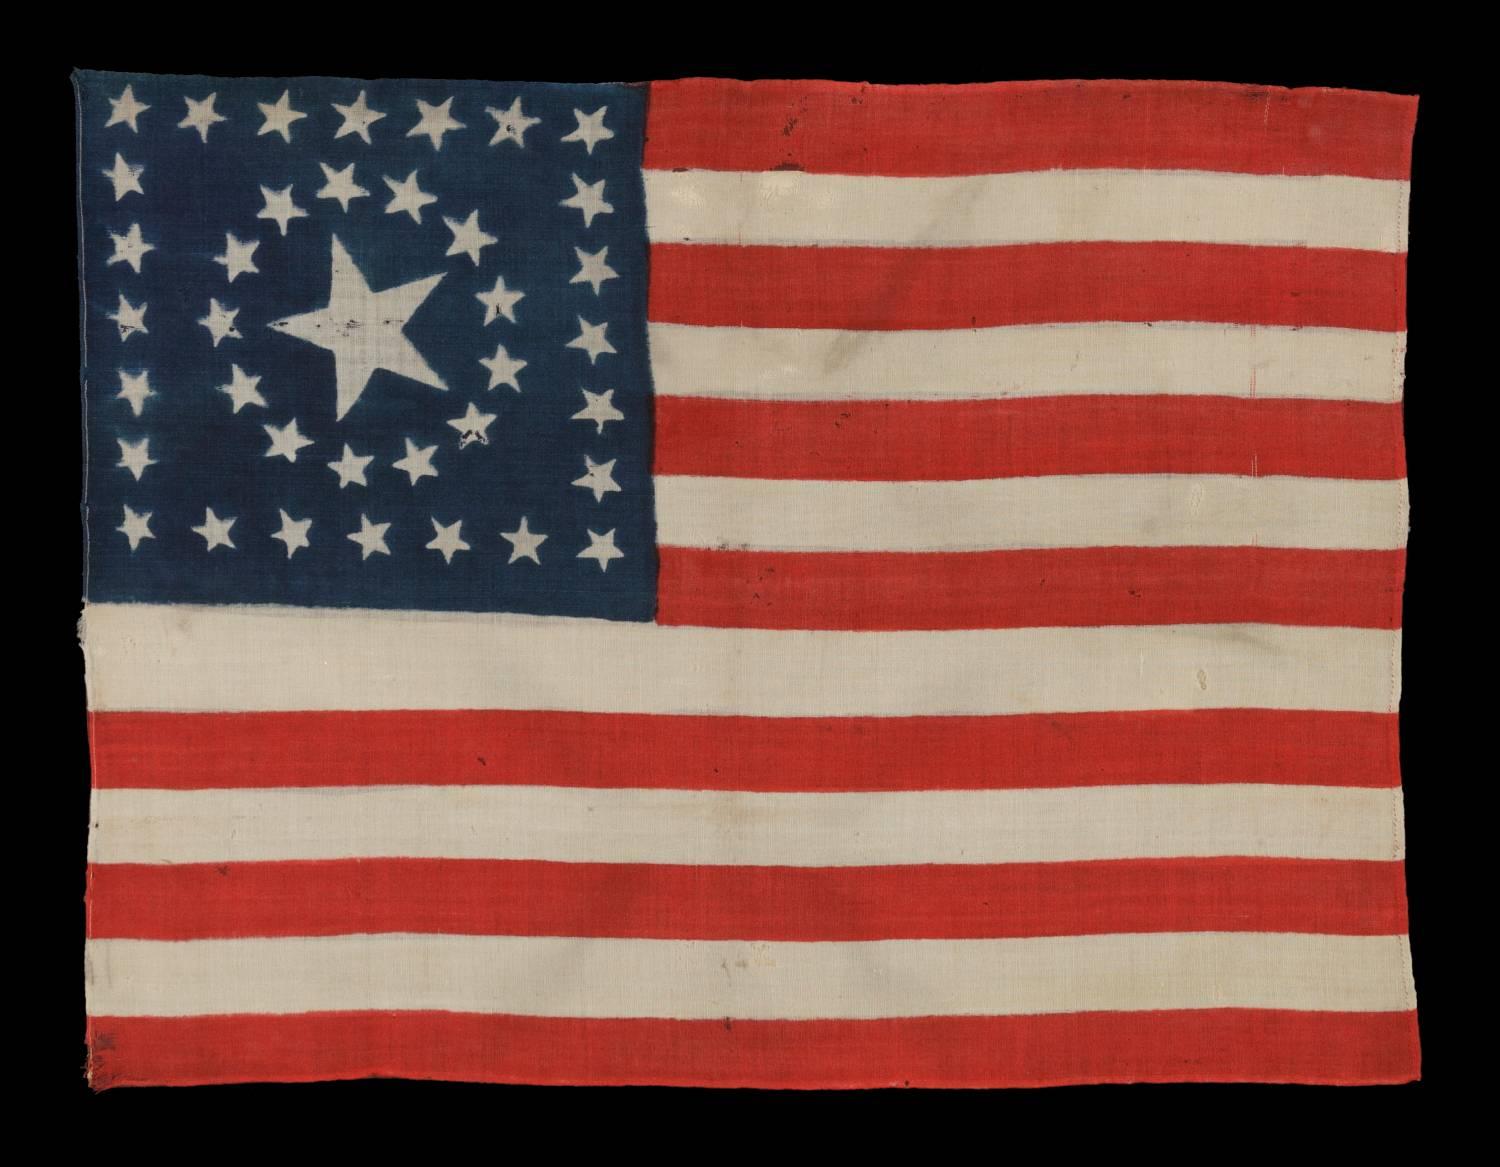 38 STARS IN A RARE CIRCLE-IN-A-SQUARE MEDALLION WITH A HUGE CENTER STAR, MADE FOR THE 1876 CENTENNIAL CELEBRATION, PROBABLY BY HORSTMANN BROS. IN PHILADELPHIA: 

38 Star American national parade flag with an especially rare type of medallion star